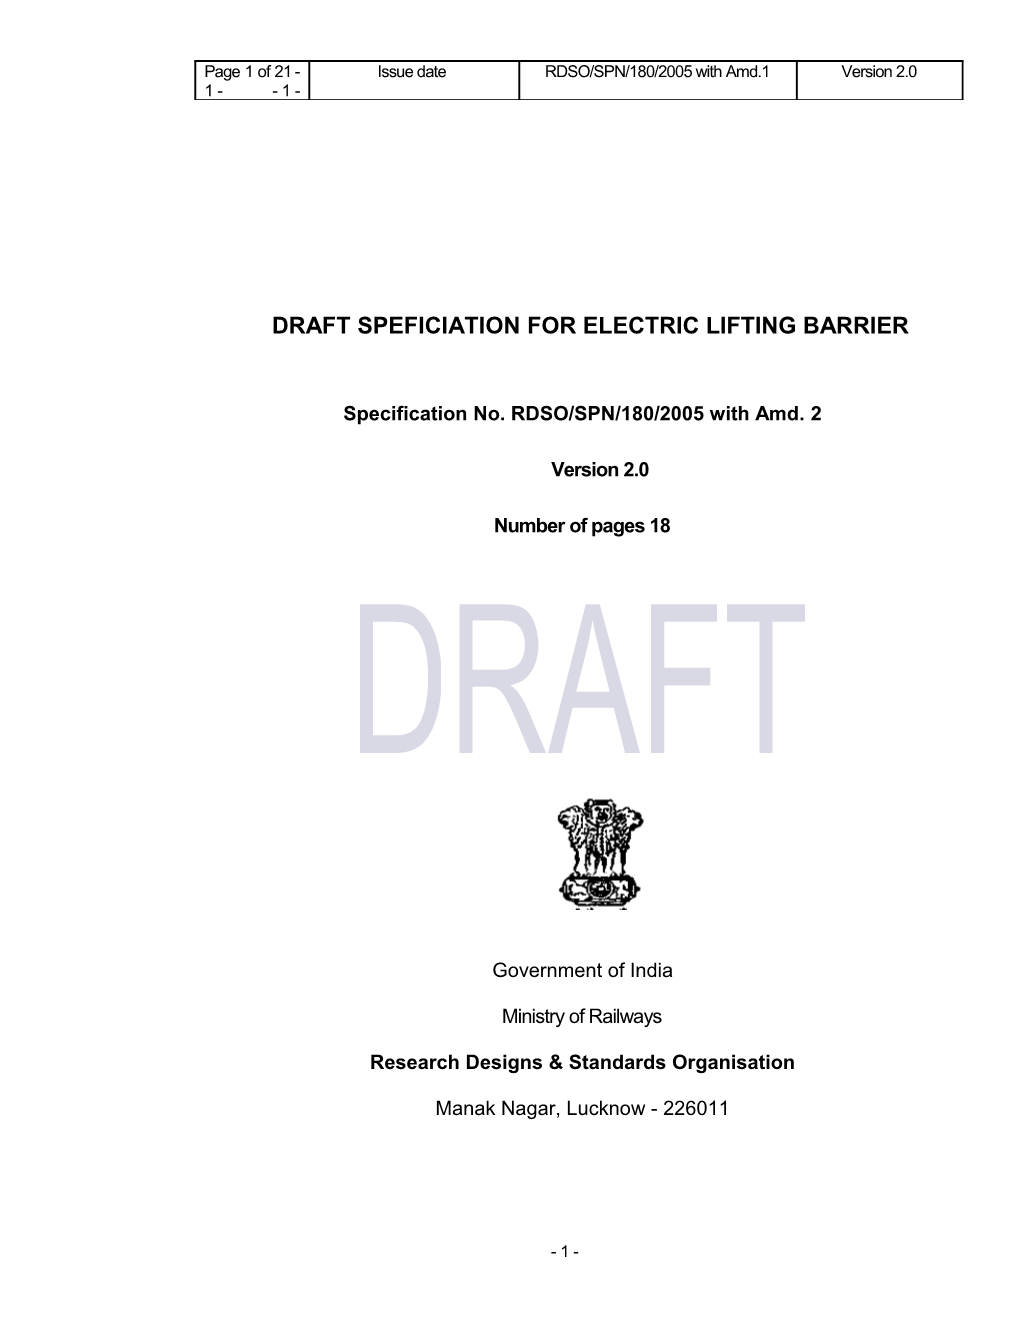 Draft Speficiation for Electric Lifting Barrier